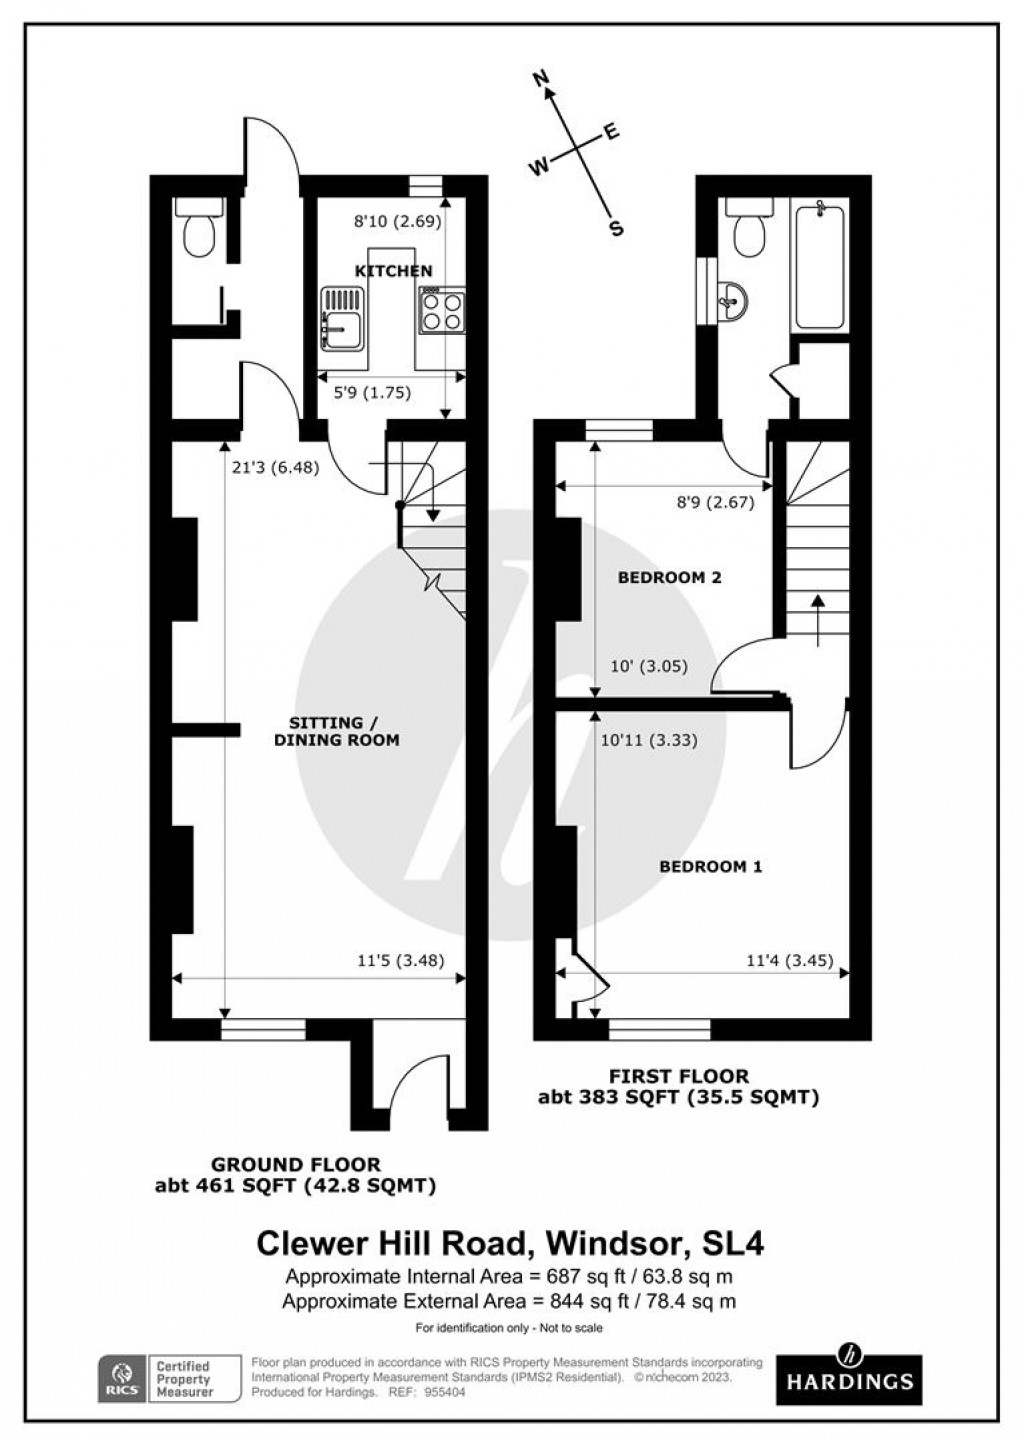 Floorplan for Clewer Hill Road, Windsor